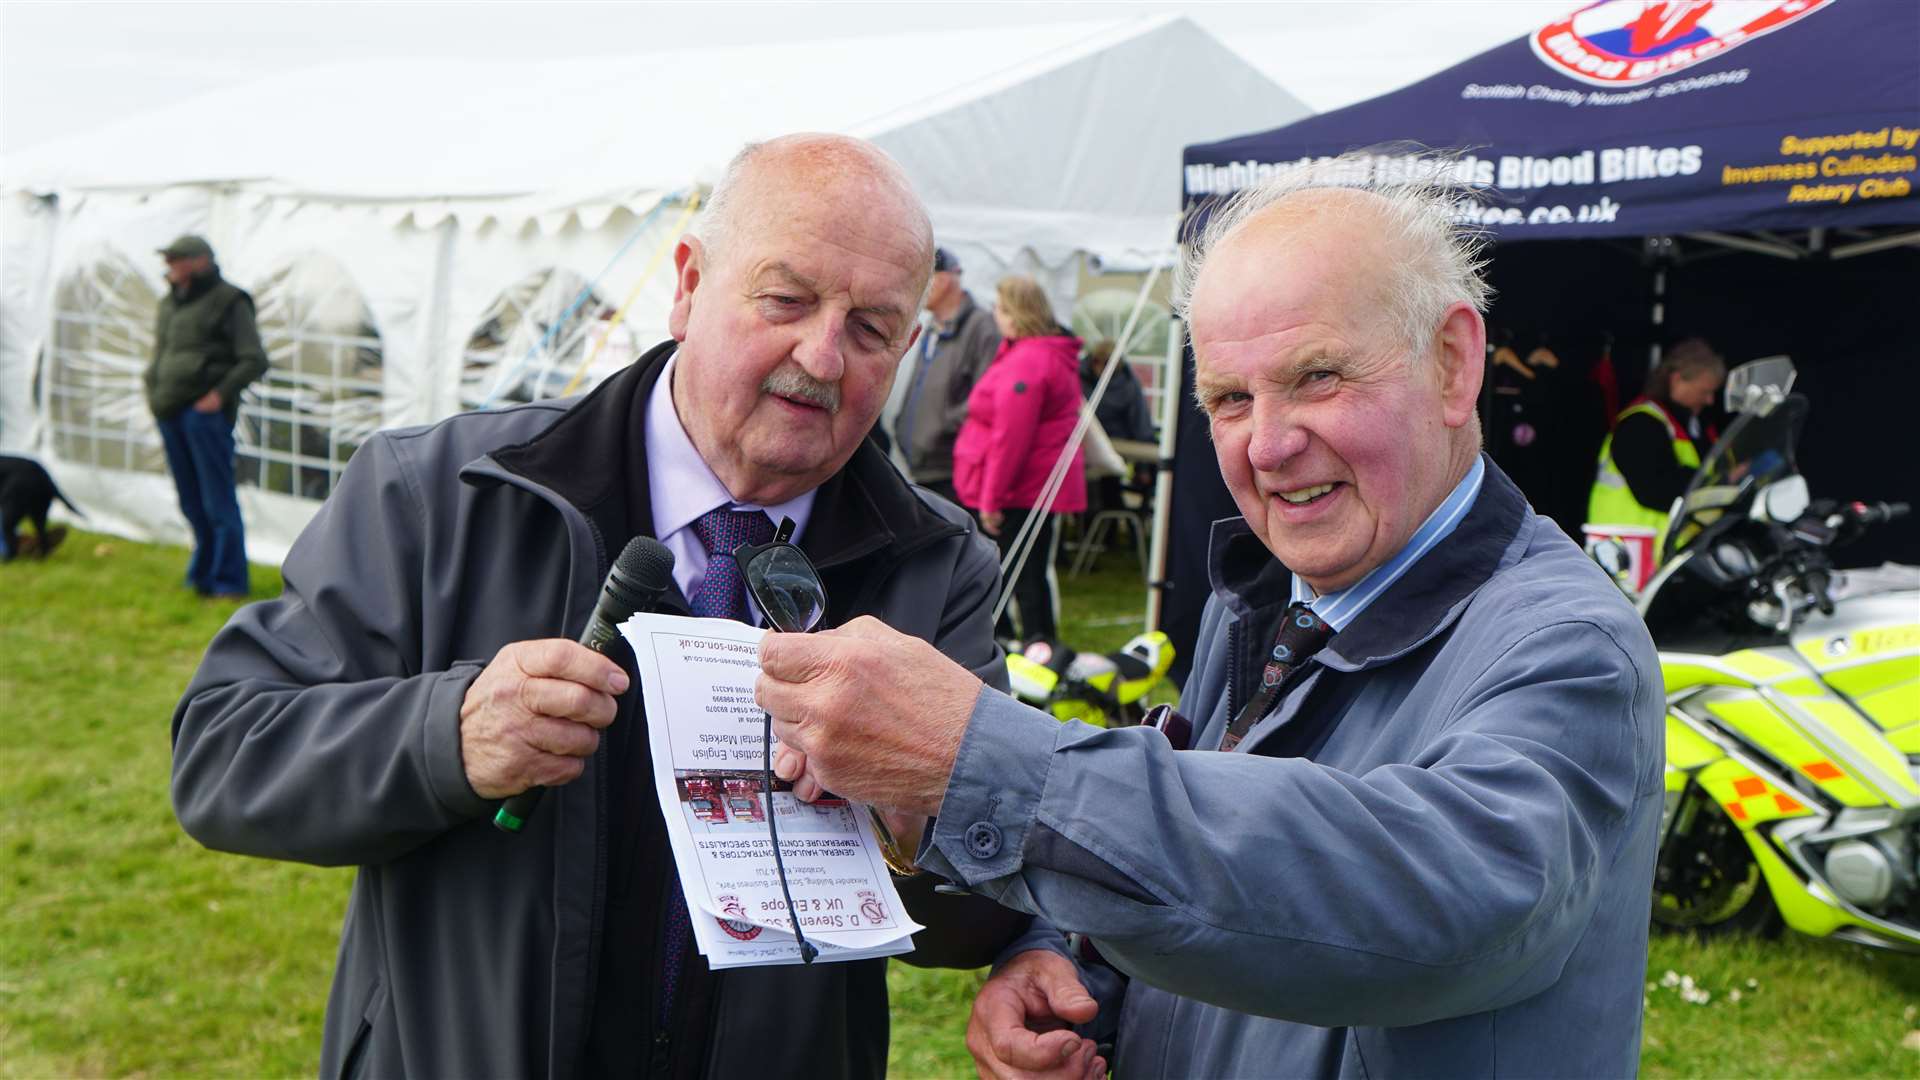 George Sutherland brought his two door classic Jaguar but had lost his glasses. Willie Mackay, at left, gives George back his glasses which were found in the 20-acre field by a member of the public. Picture: DGS